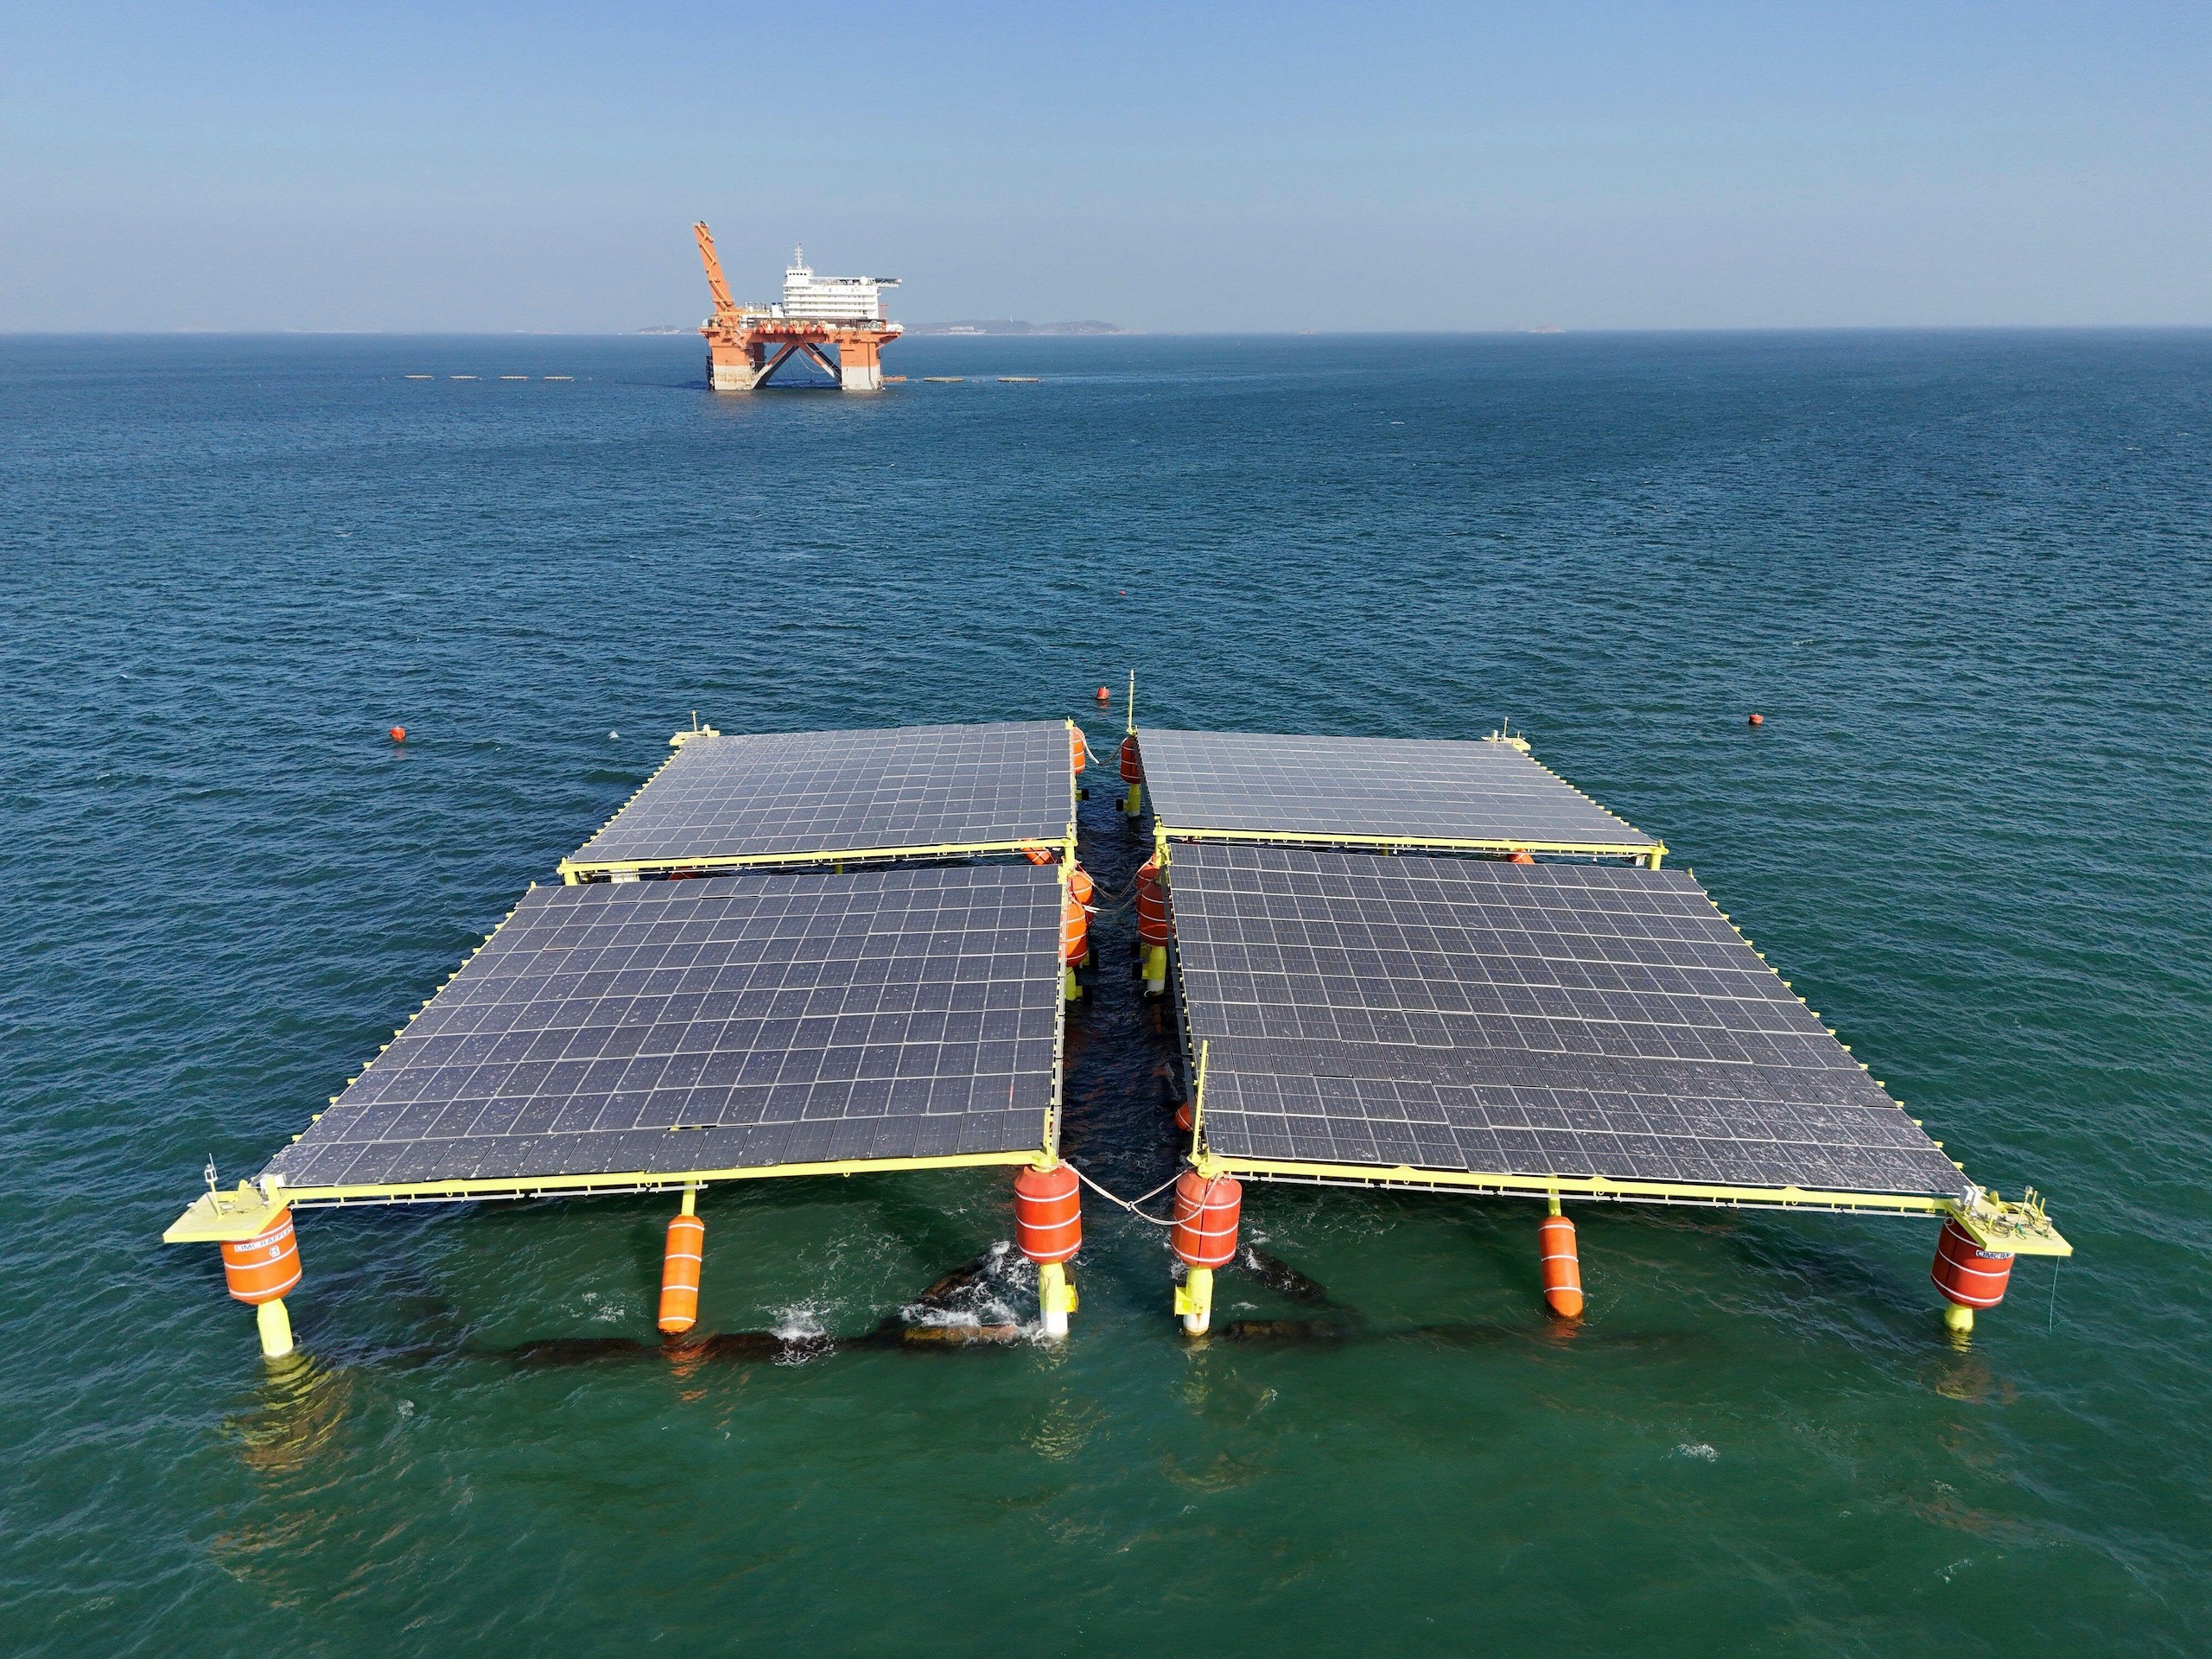 Is China ready to put solar panels out at sea?